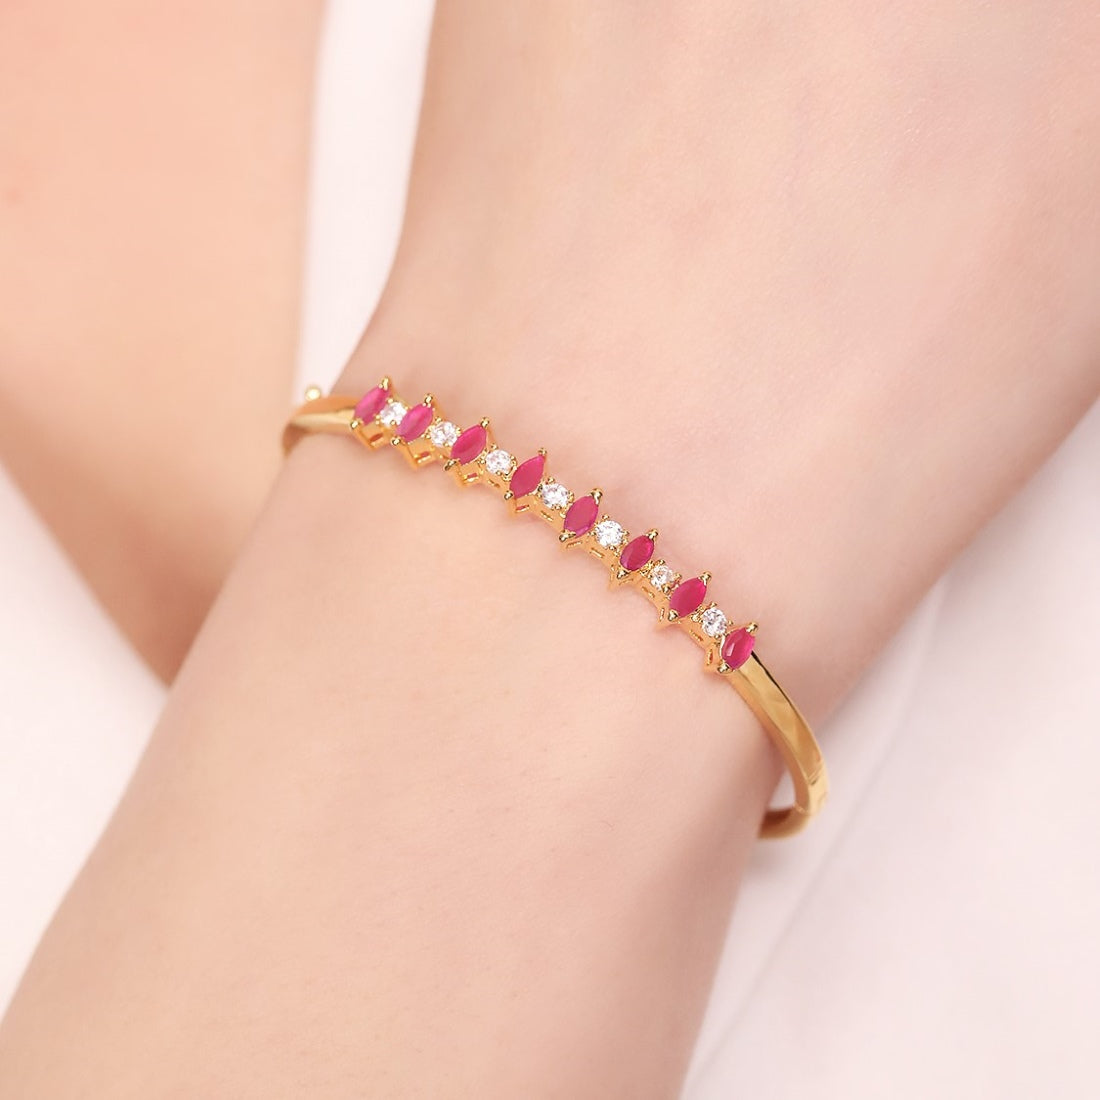 Radiant Fusion Gold-Plated 925 Sterling Silver Bracelet with Cubic Zirconia and Color Stones